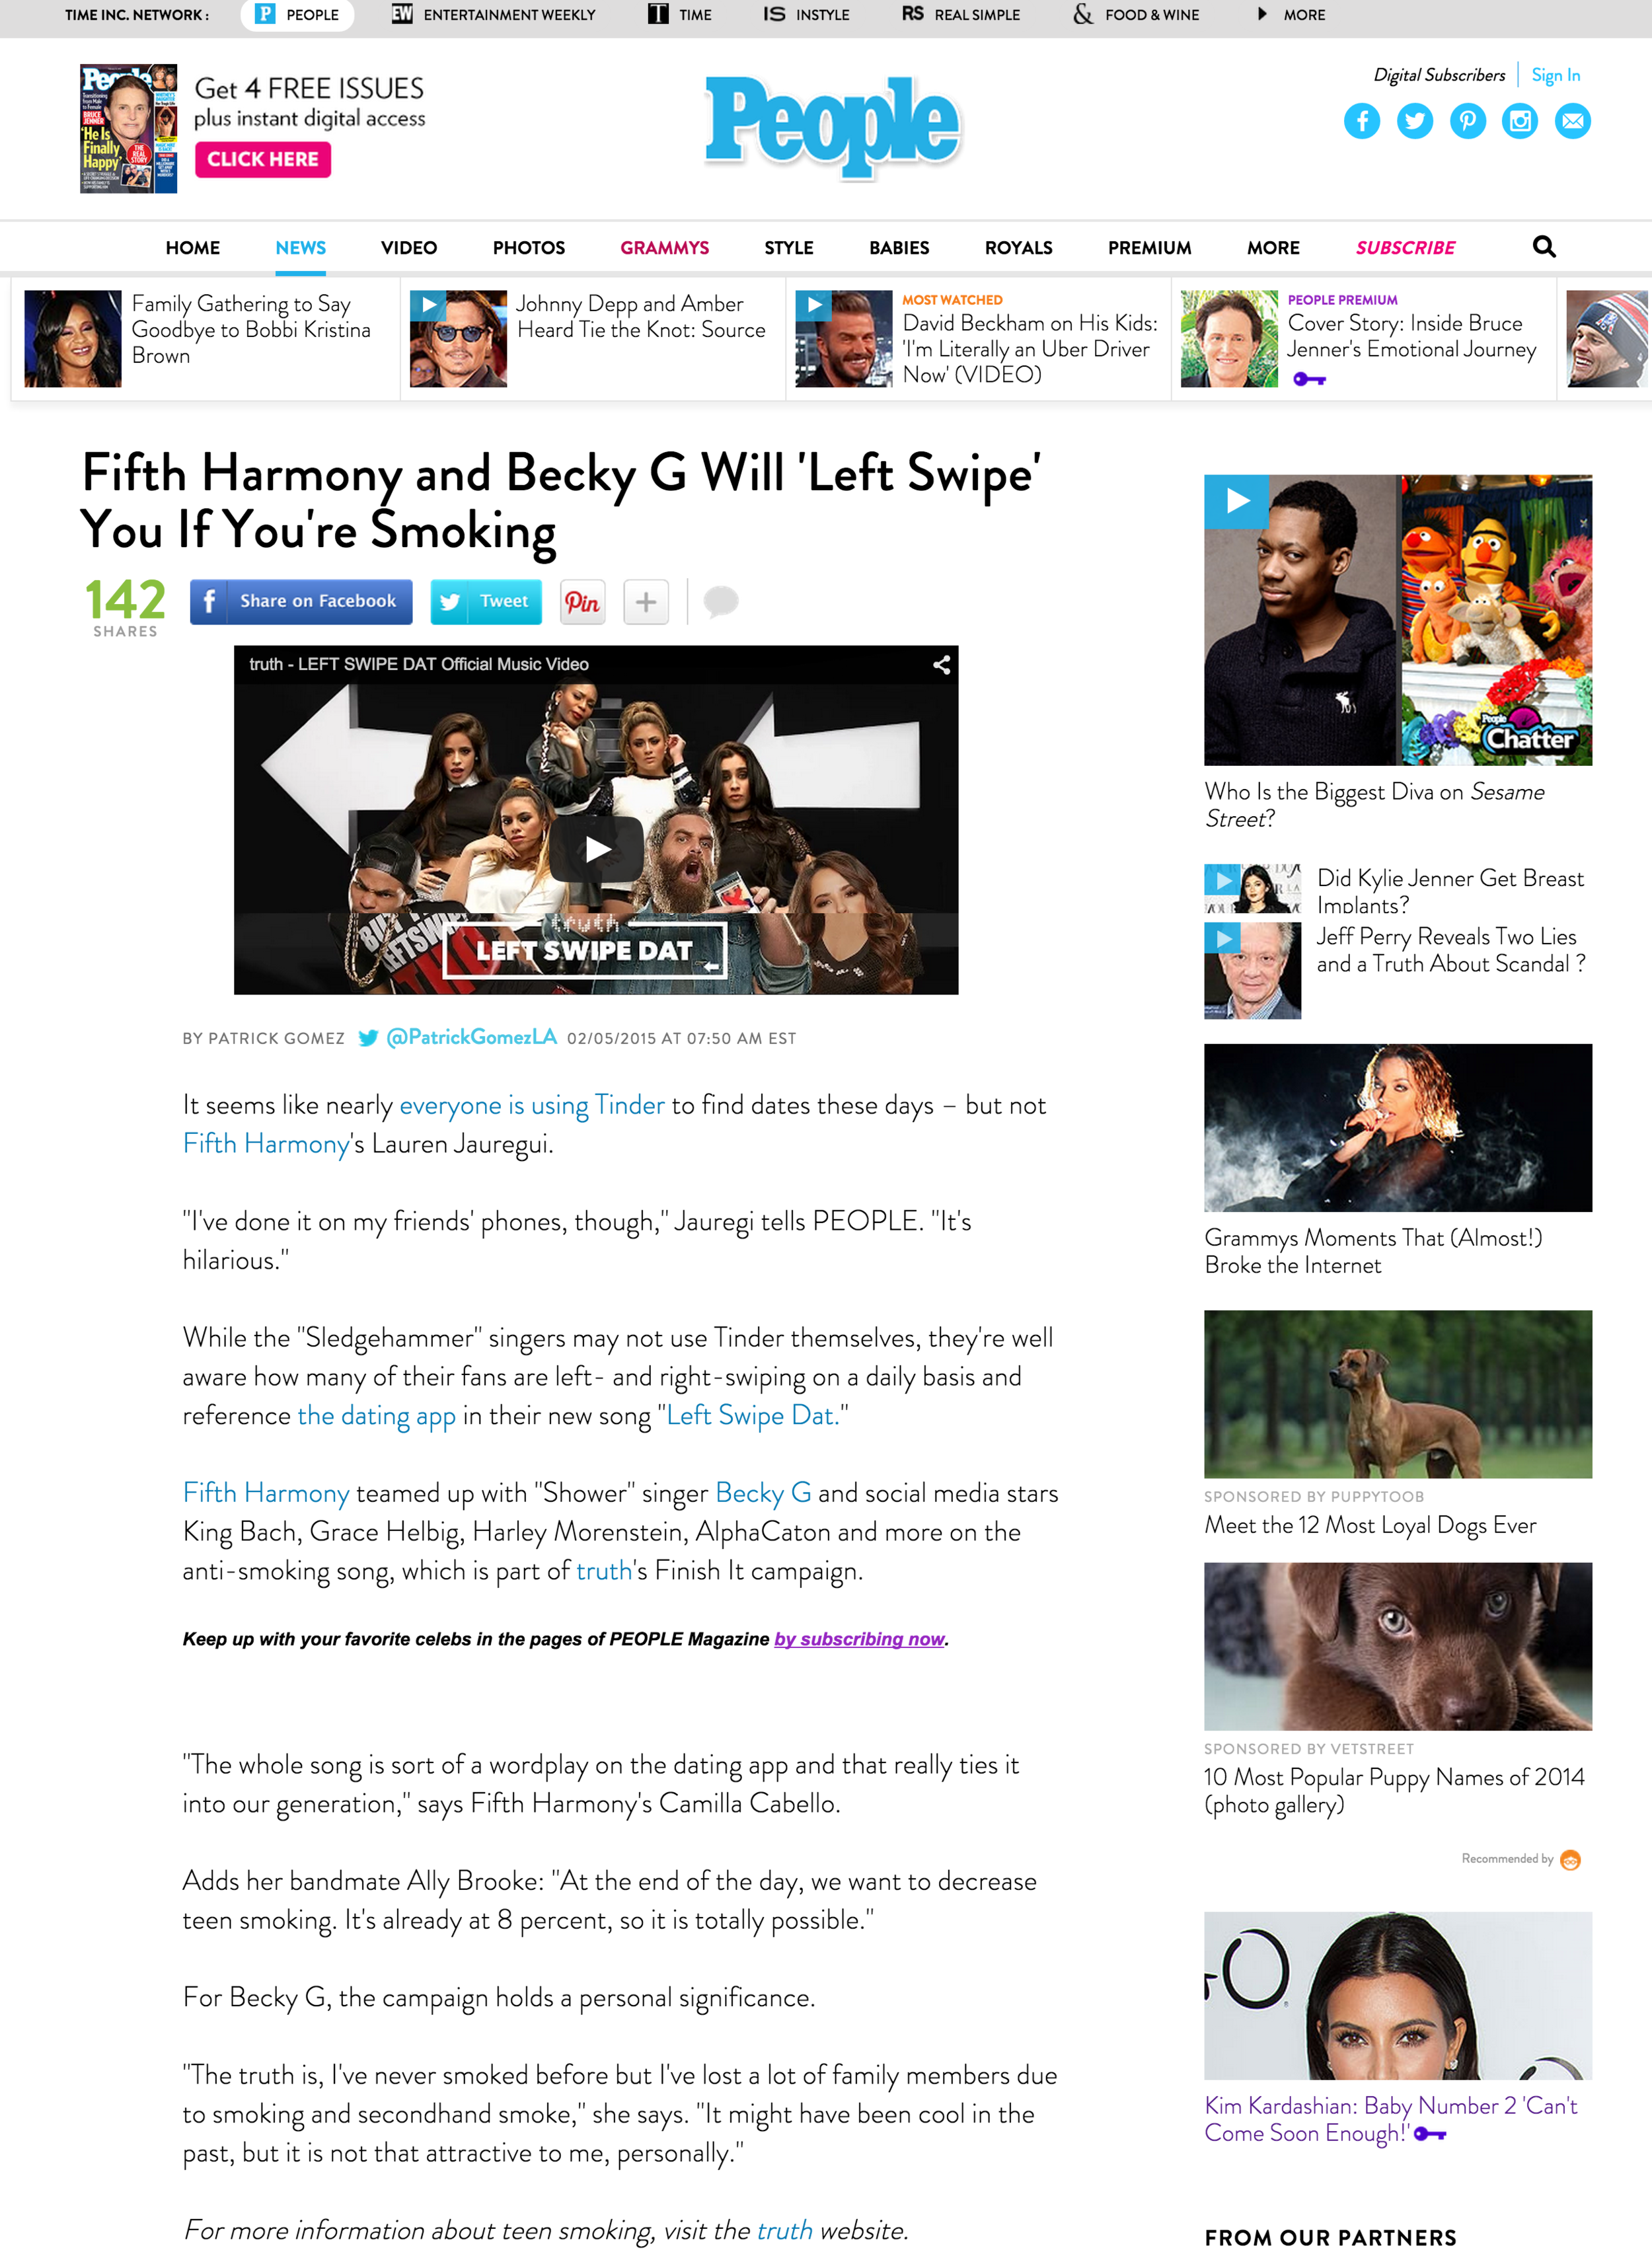 Fifth Harmony and Becky G Will 'Left Swipe' You If You're Smoking - Fifth Harmony, Health, Music News   People.com.png